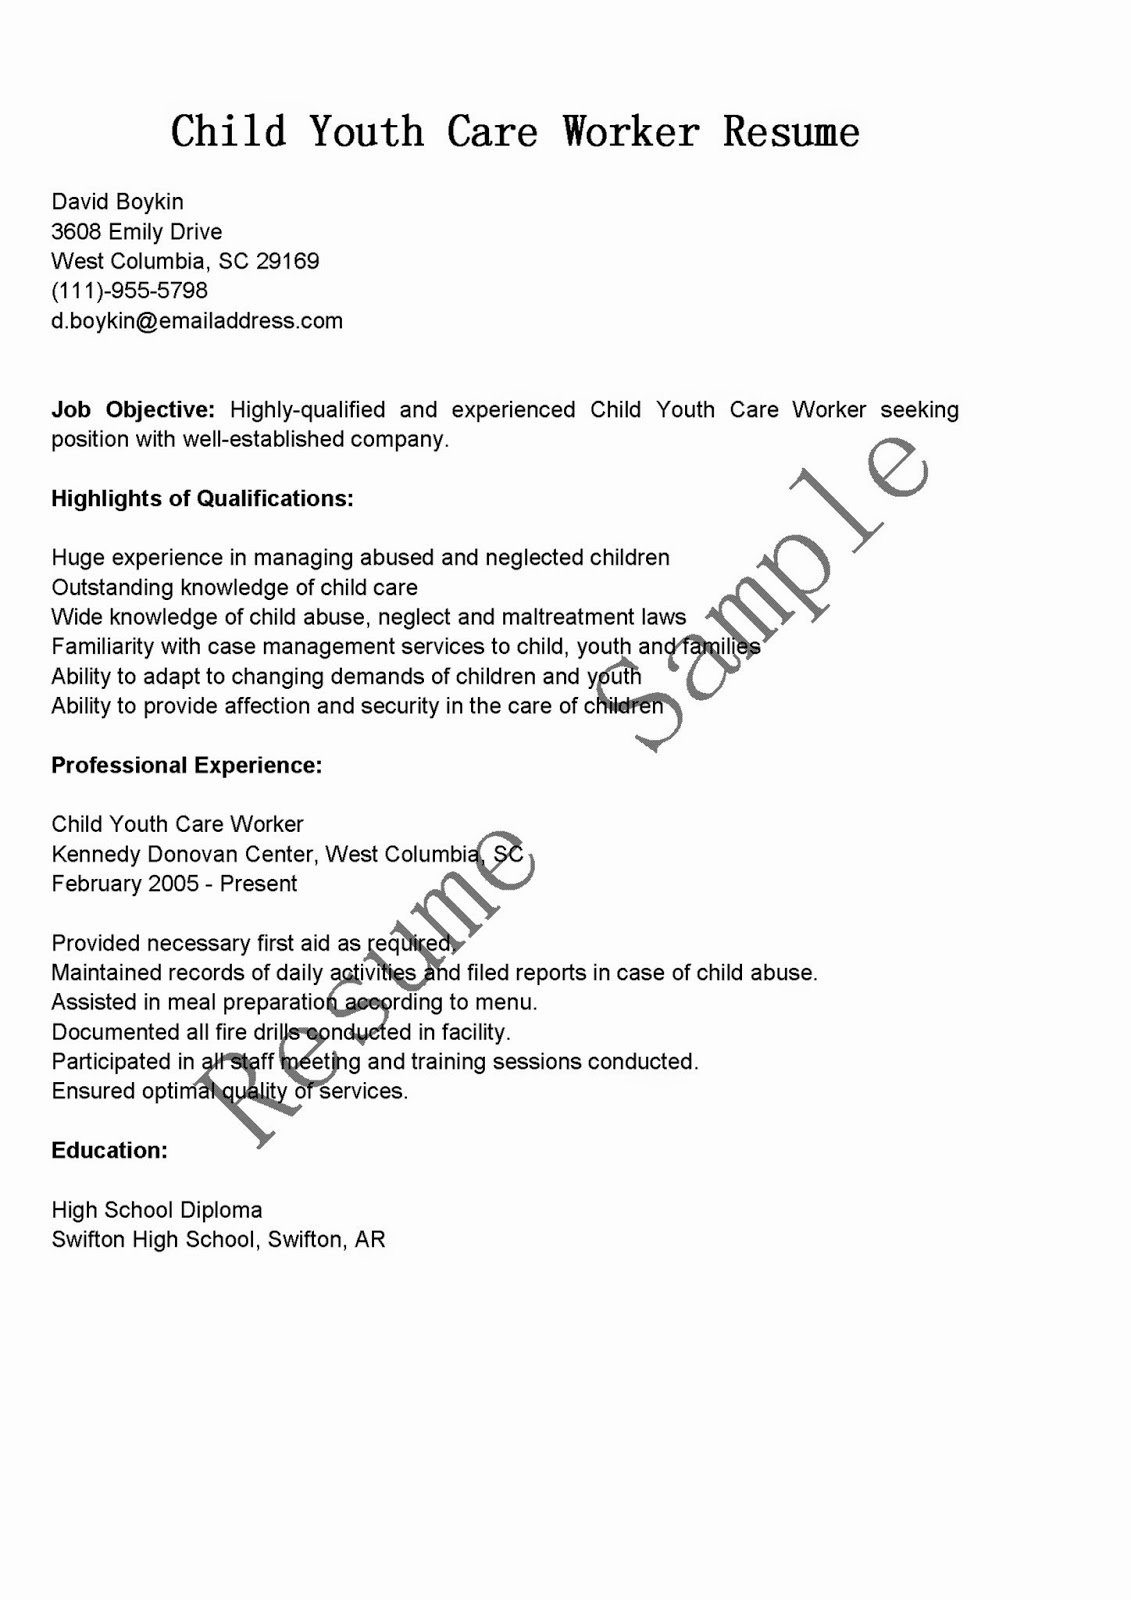 Resume Samples Child Youth Care Worker Resume Sample